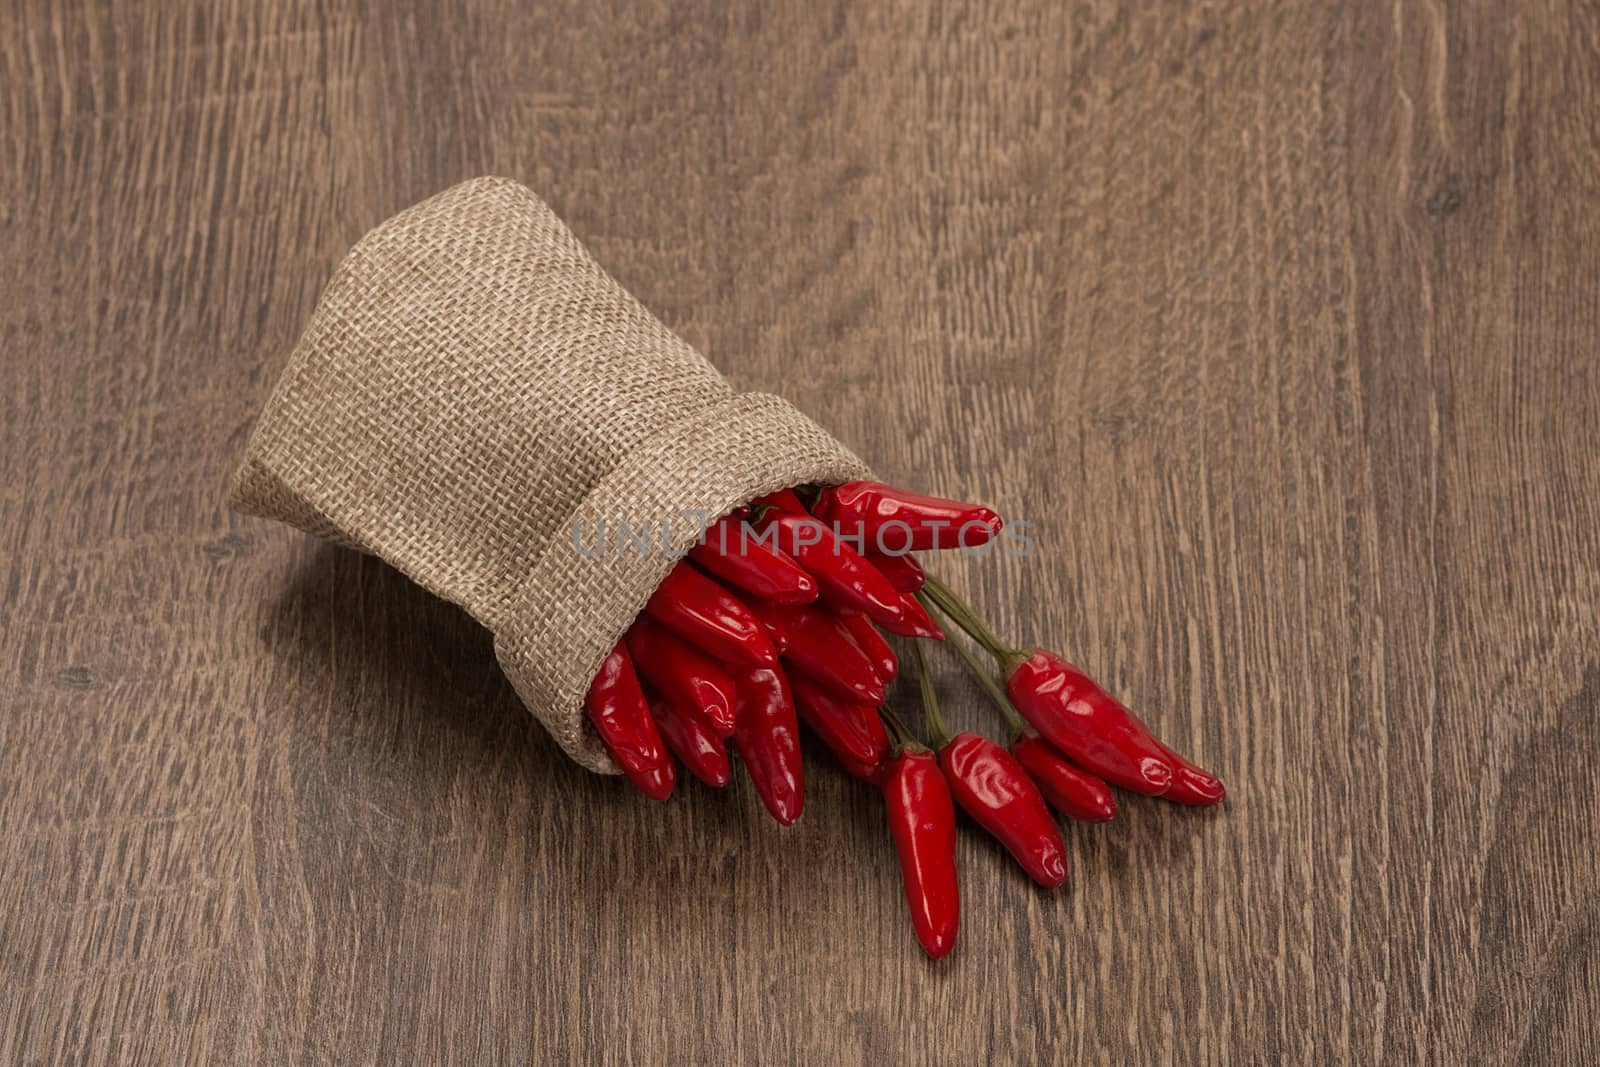 red chili peppers on dark wooden background by ivo_13